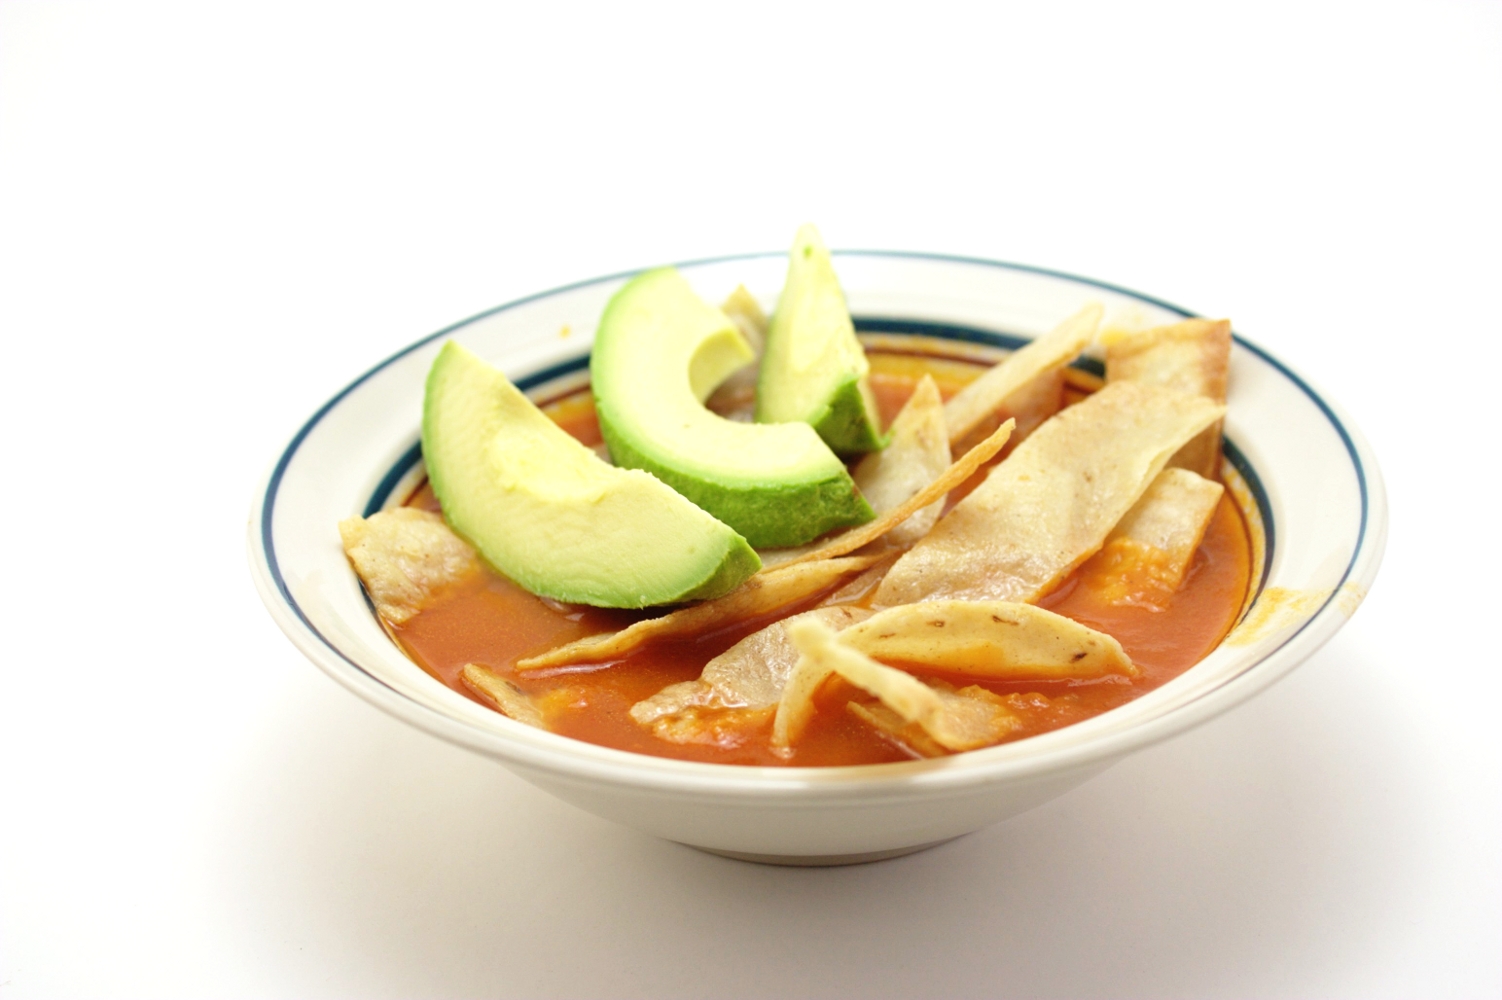 Tortilla soup, Appetizer, Gourmet, Grated, Herb, HQ Photo